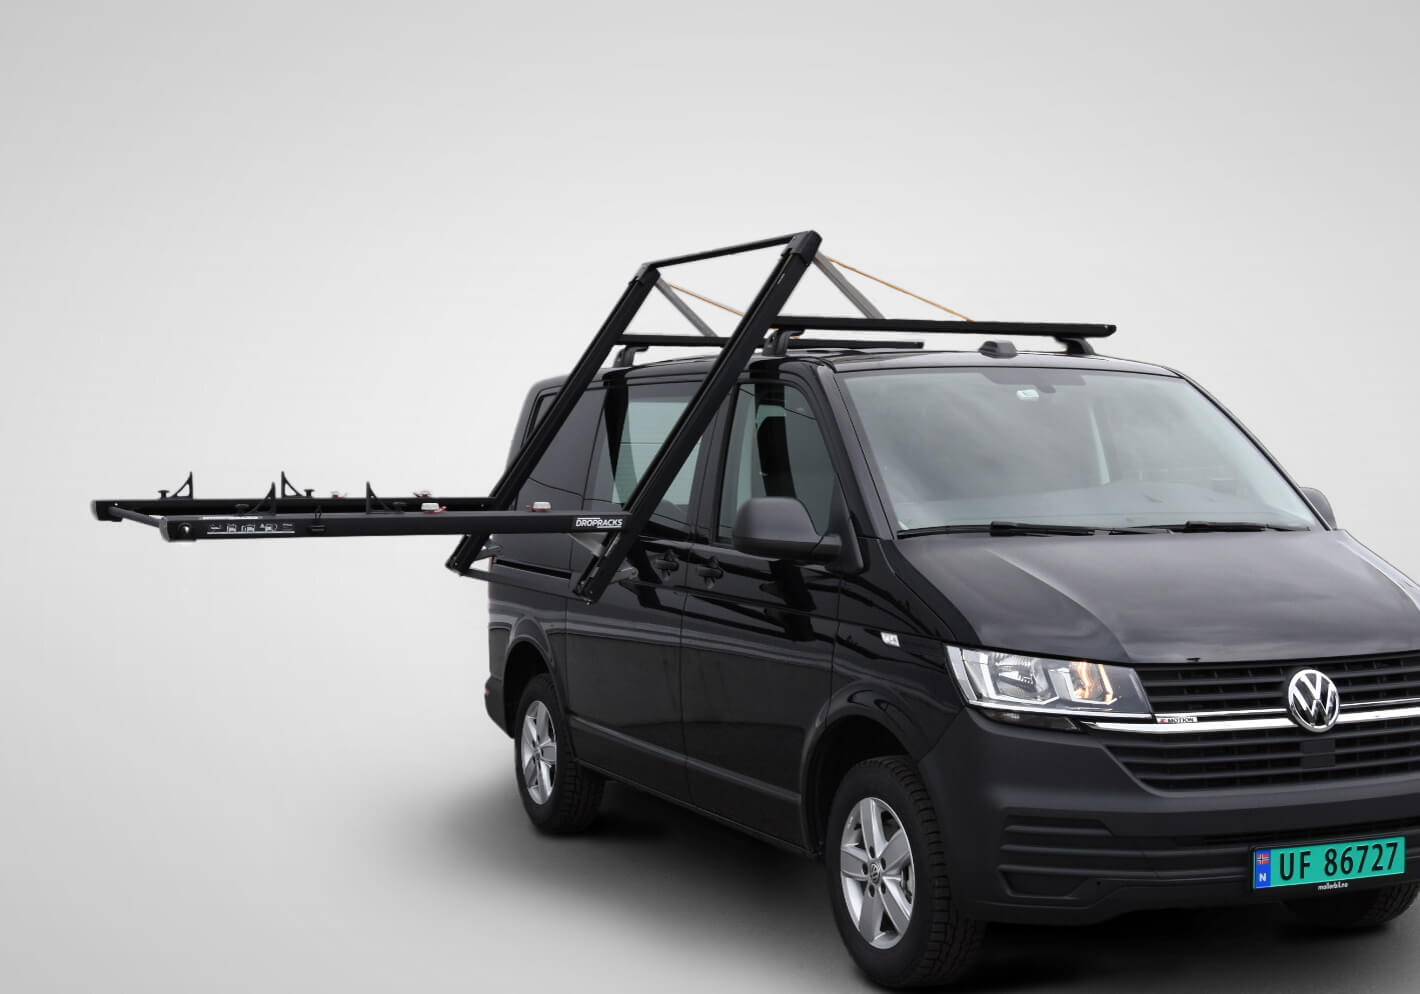 Volkswagen VW T5 Transporter L2 (LWB) H1 (low roof) (2003 to 2015):Dropracks XL roof loading system (vehicle roof connectors at extra cost)